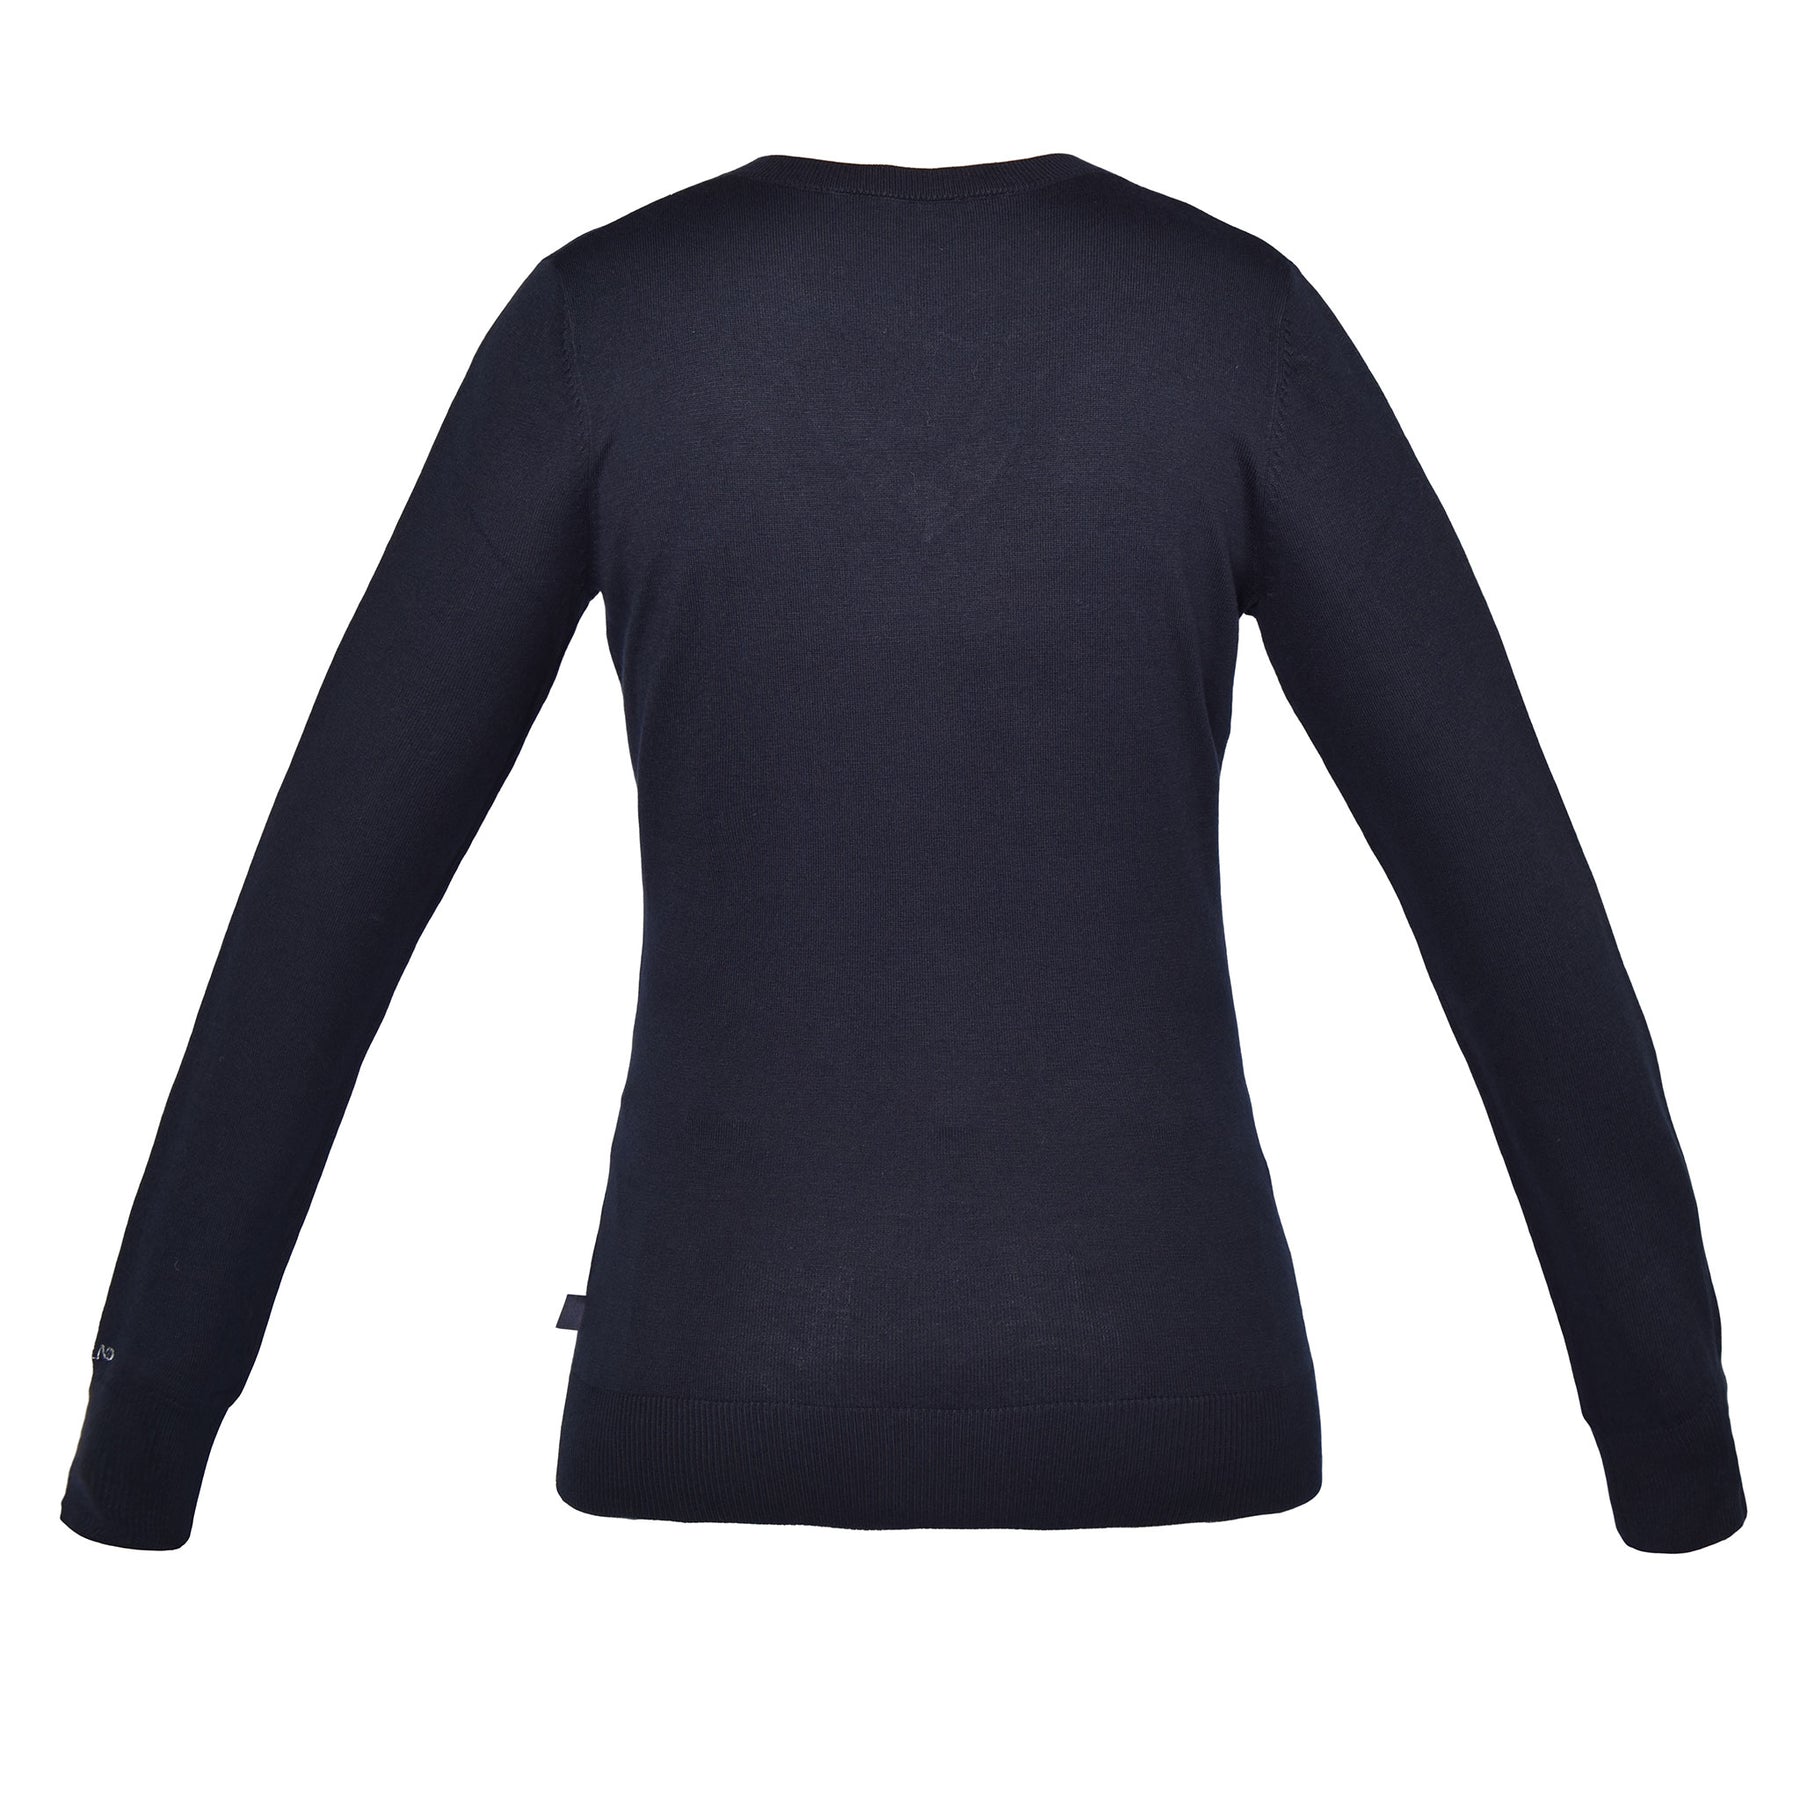 Kingsland Classic Ladies Knitted Sweater